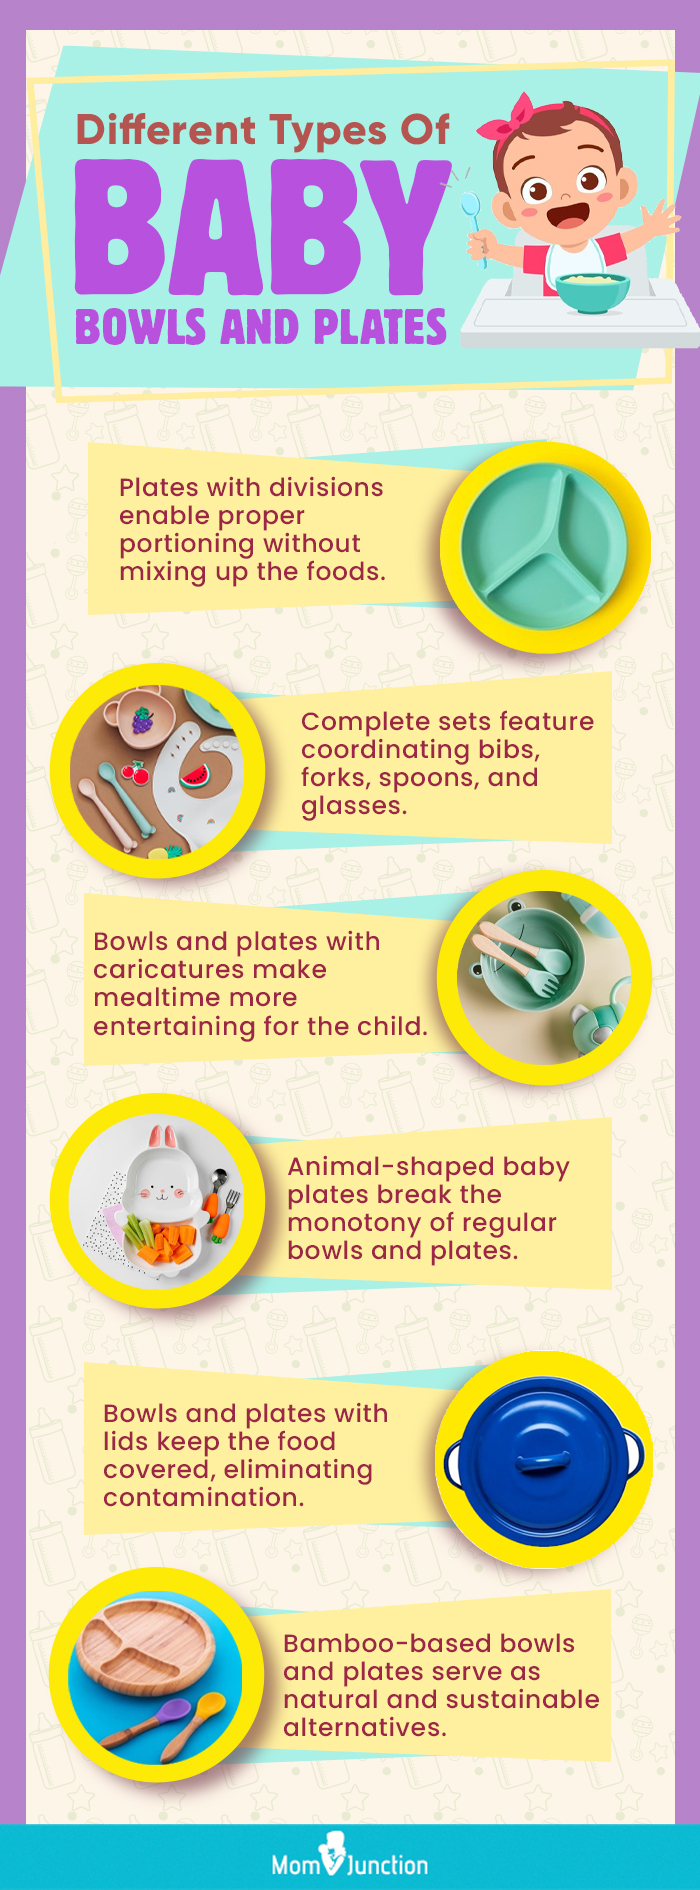 https://www.momjunction.com/wp-content/uploads/2023/08/Different_Types_Of_Baby_Bowls_And_Plates.jpg